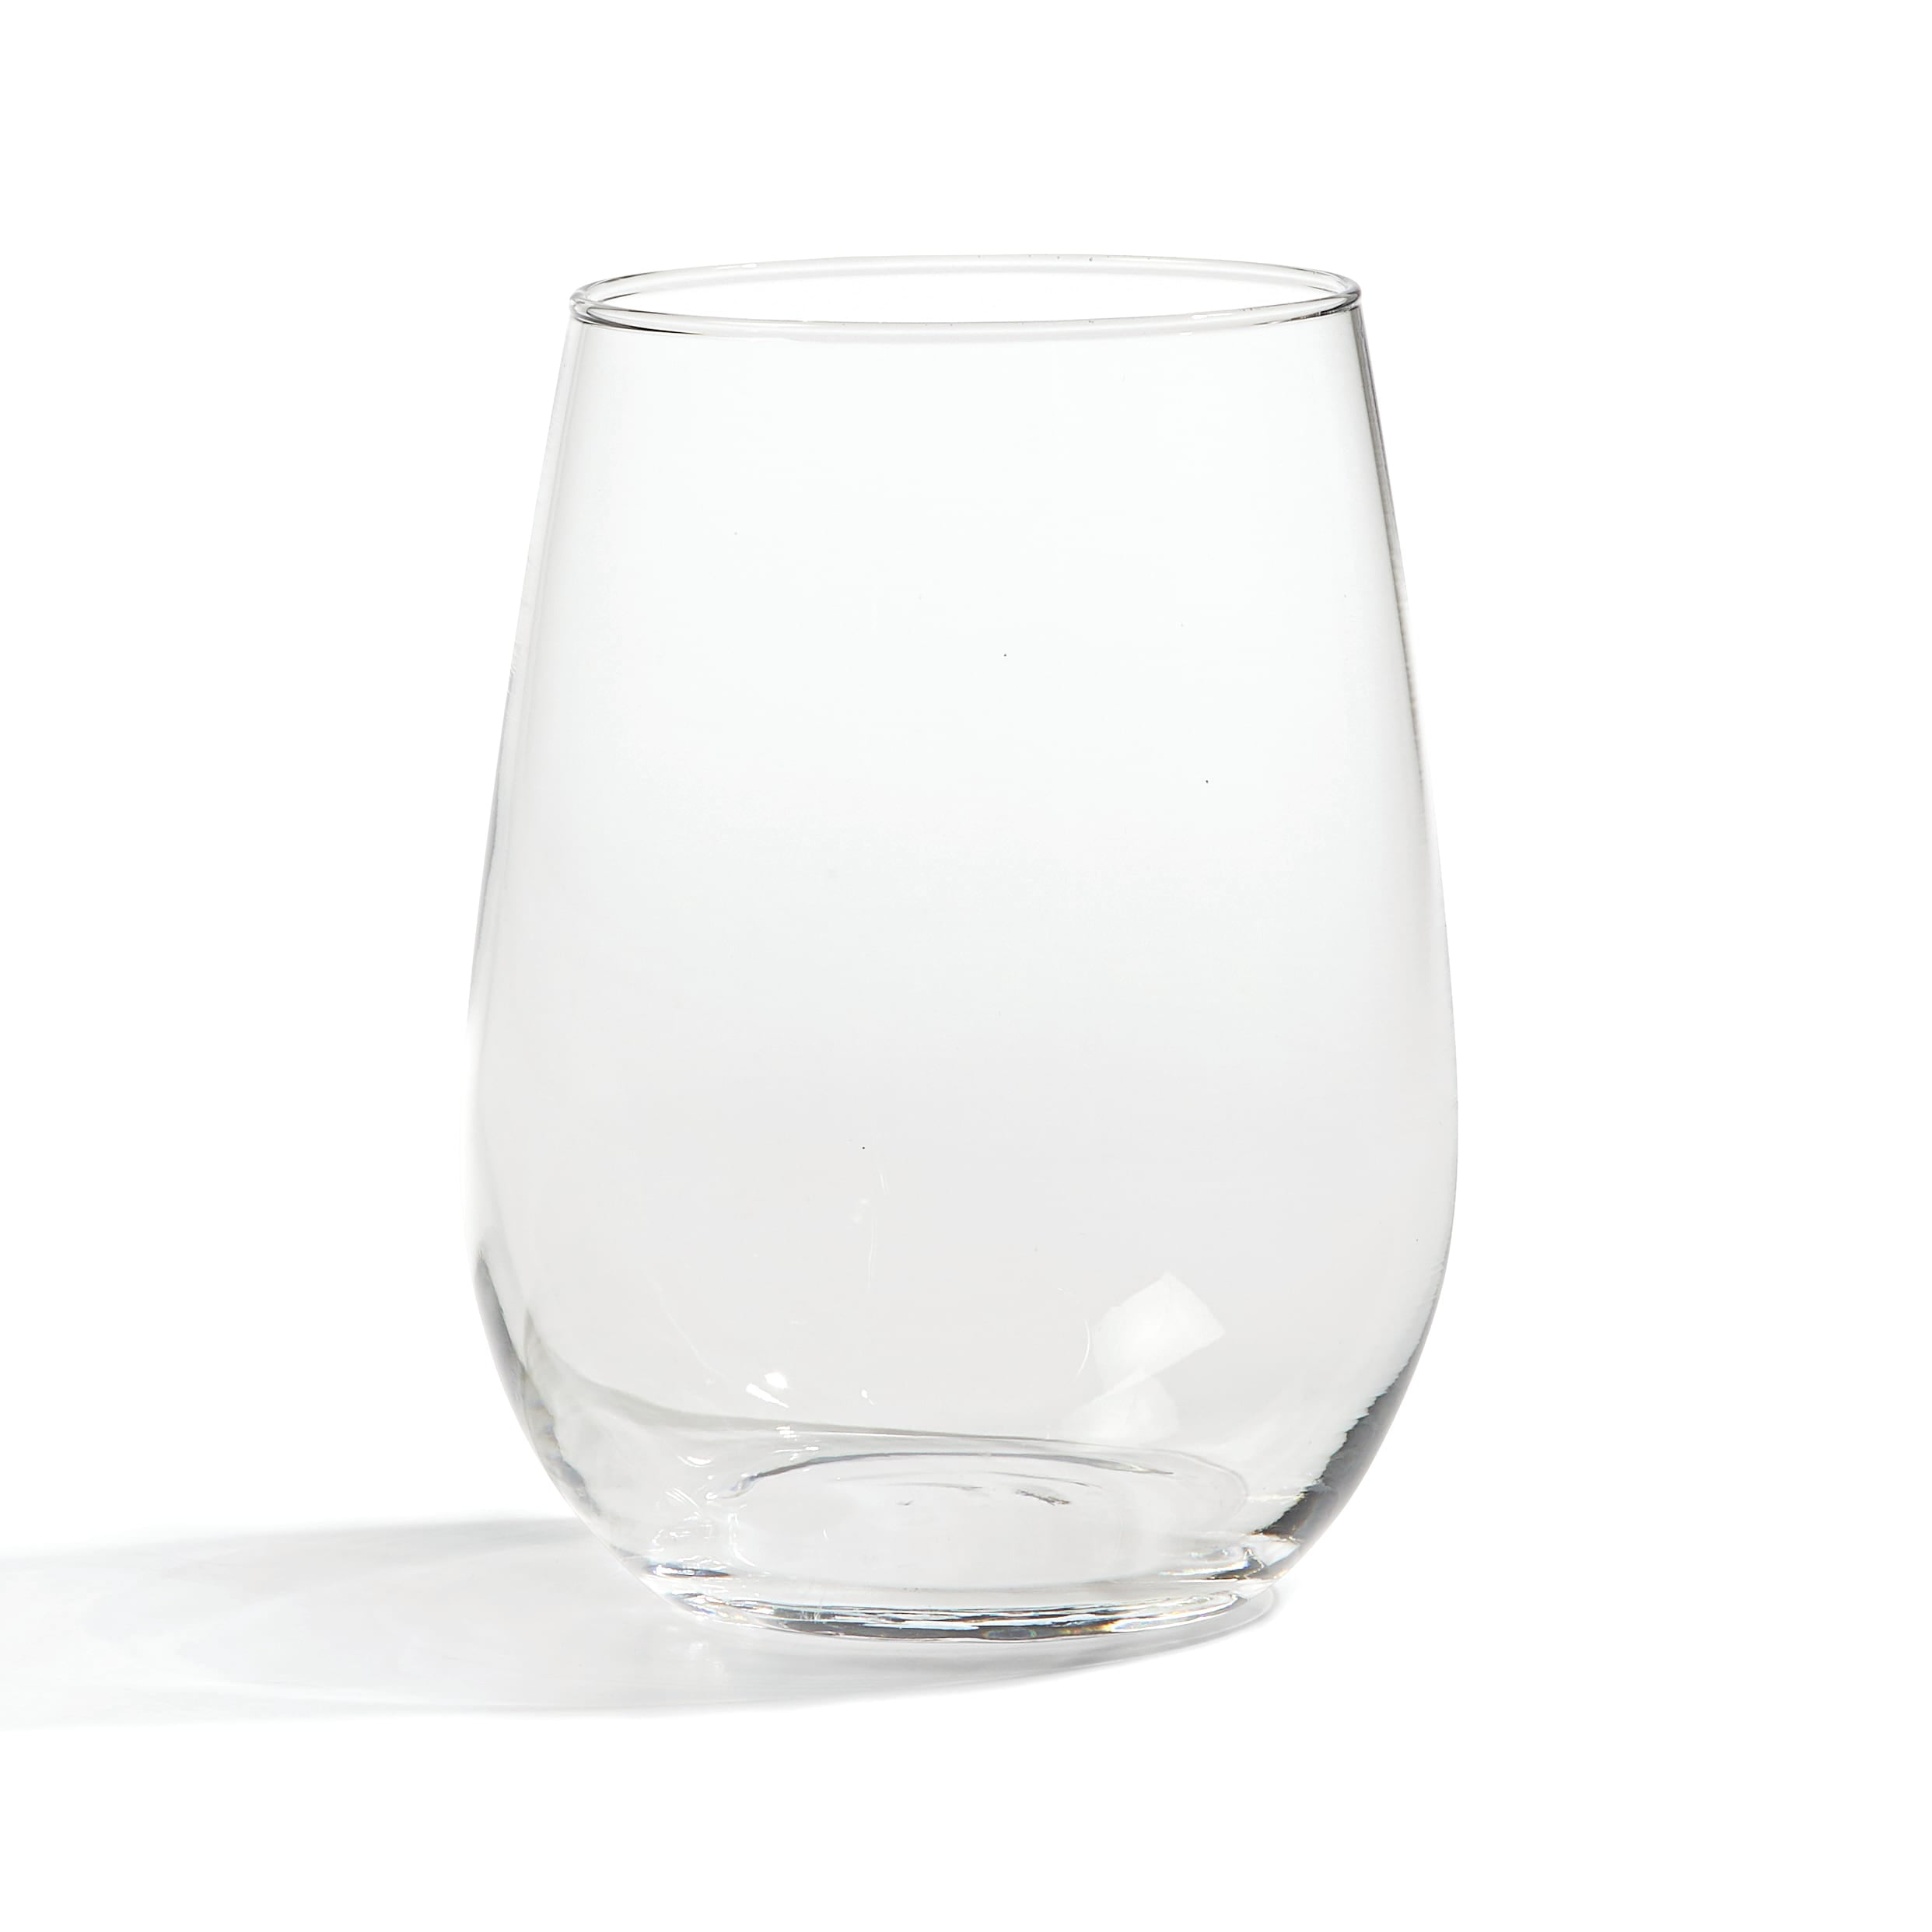 Better Homes and Garden Stemless Wine Glasses Wilmond Set Of 4